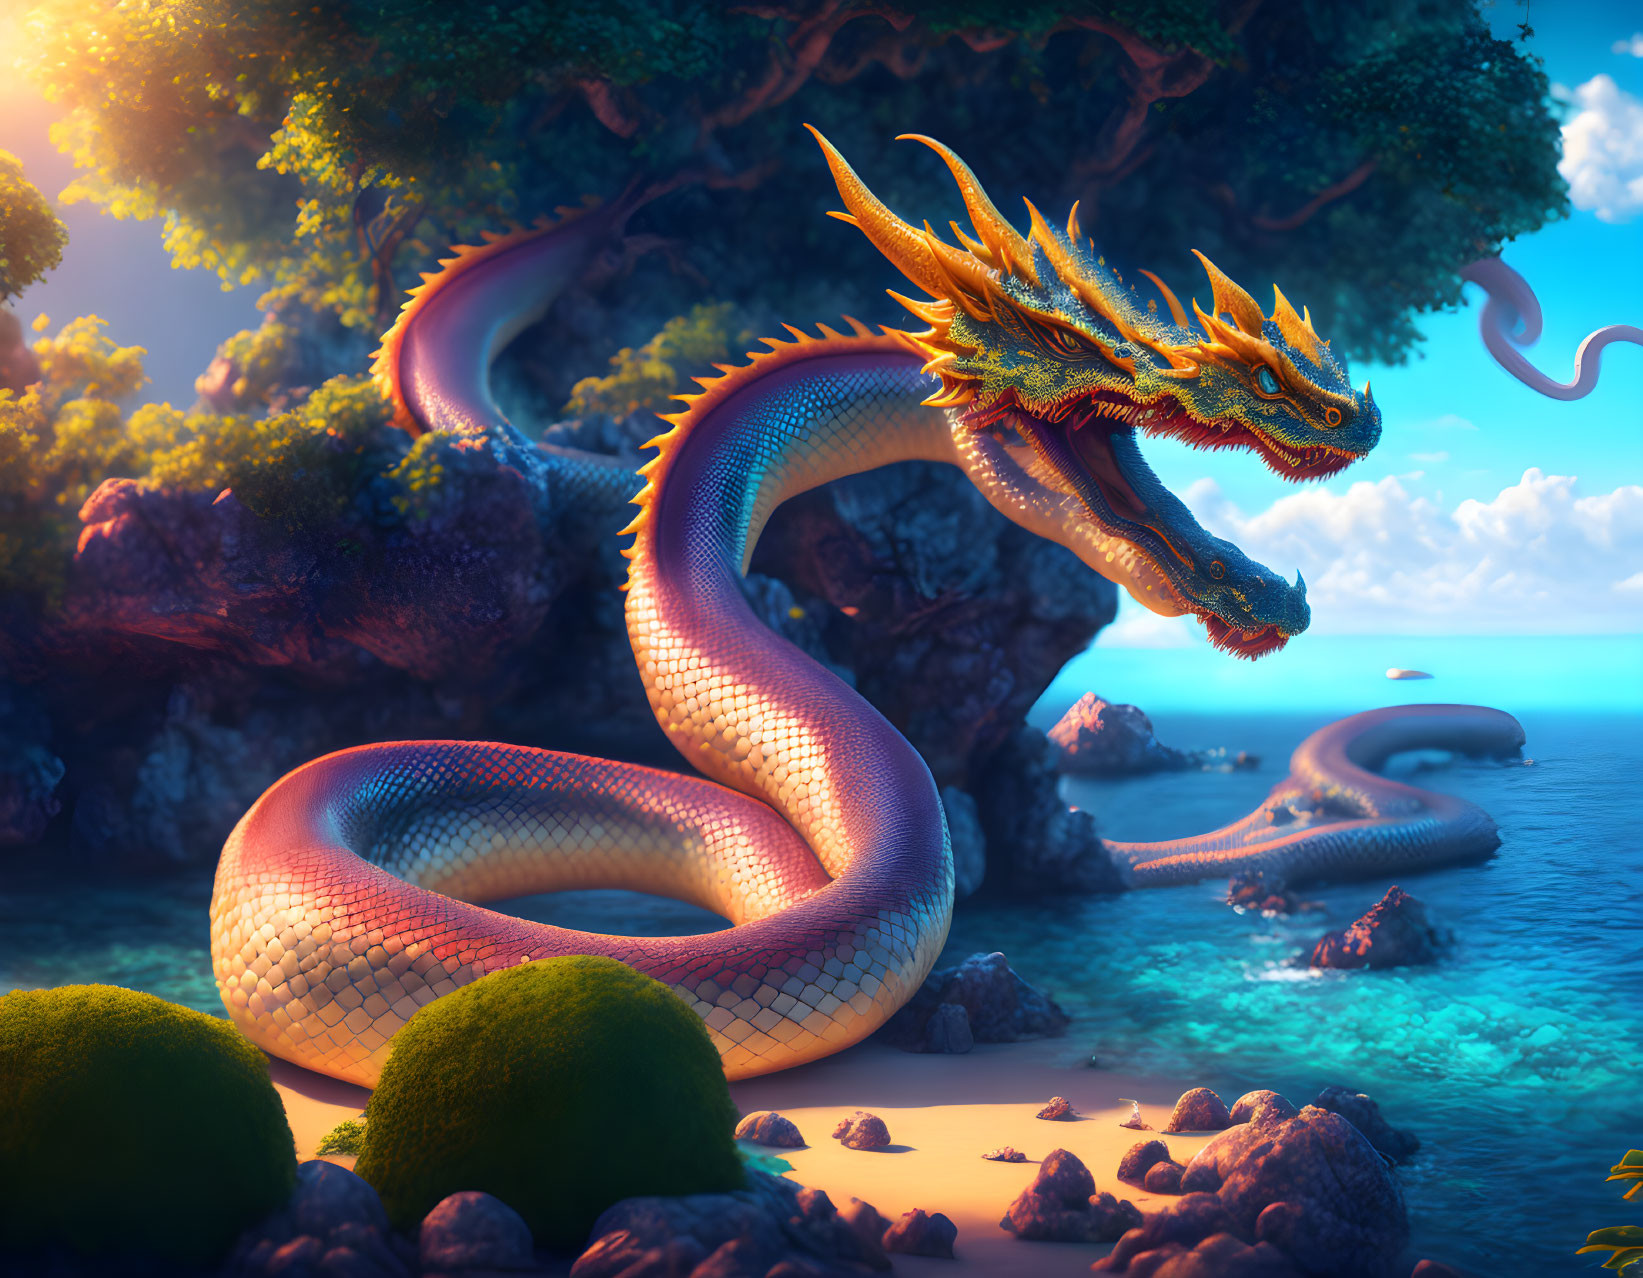 Colorful Majestic Dragon Coils Around Ancient Tree in Tranquil Forest